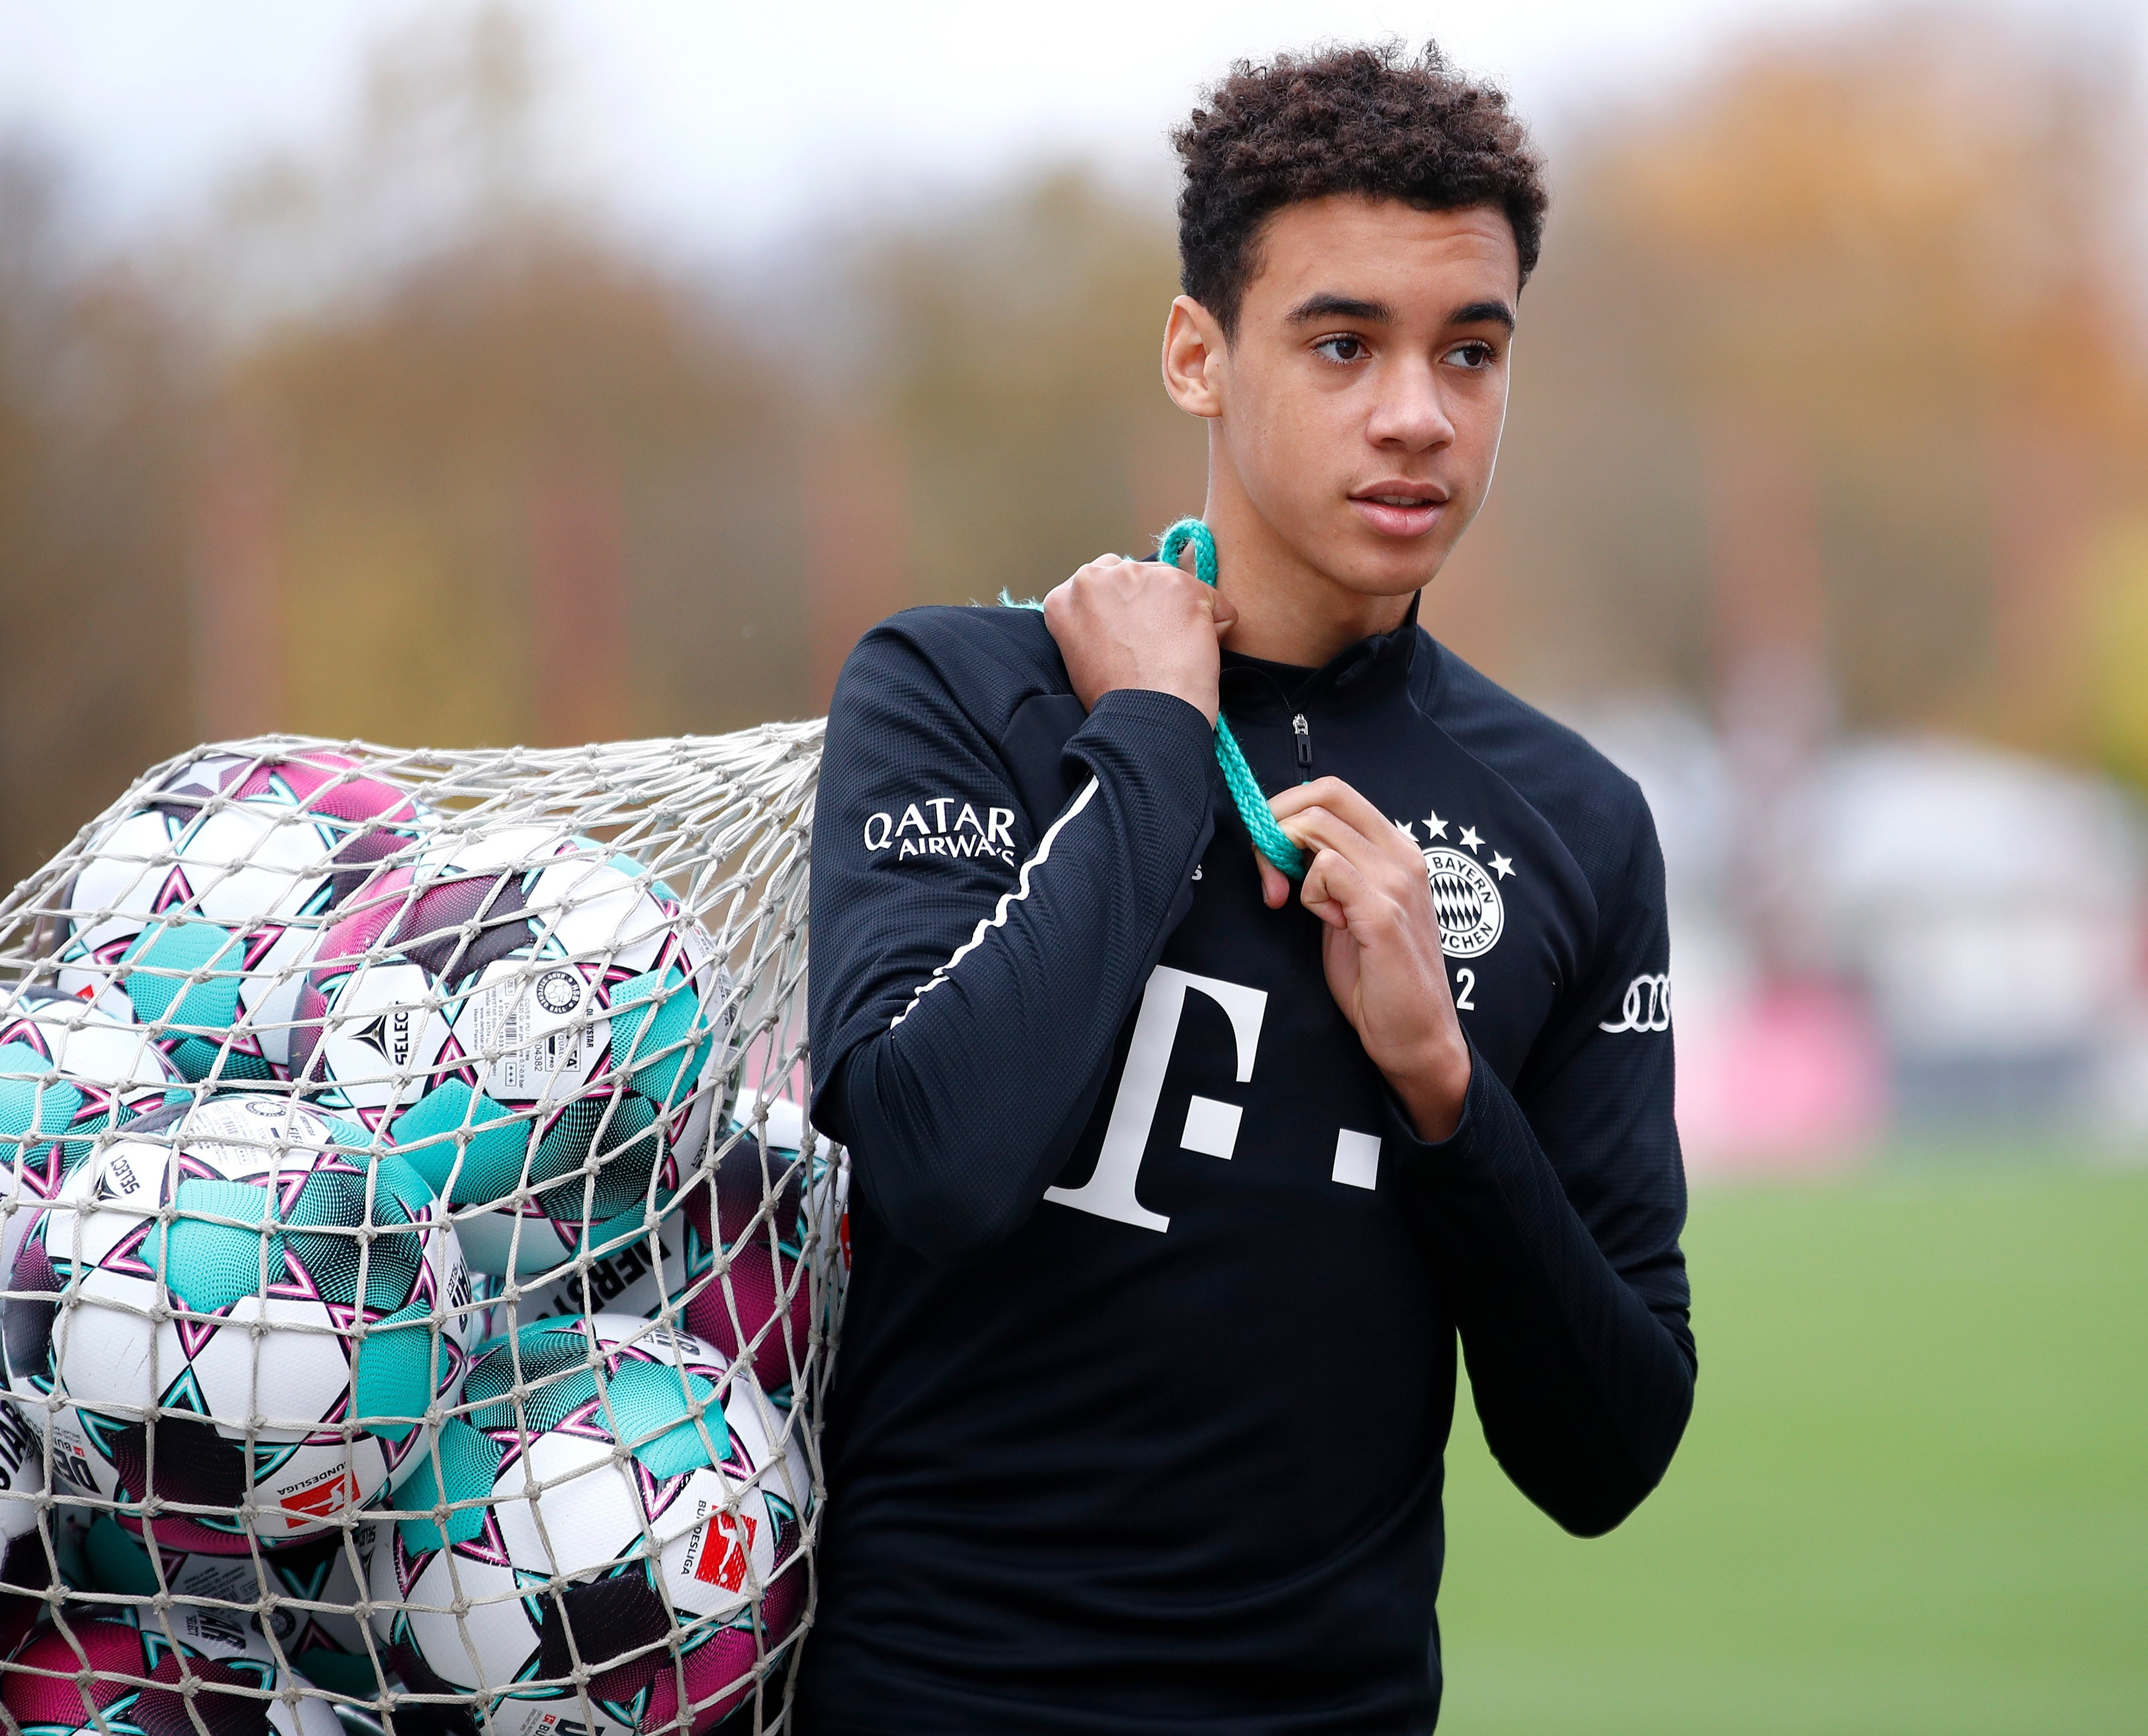 Bayern Munich Wonderkid Jamal Musiala Set For First England Under 21s Call After Quitting Chelsea Academy In 2019